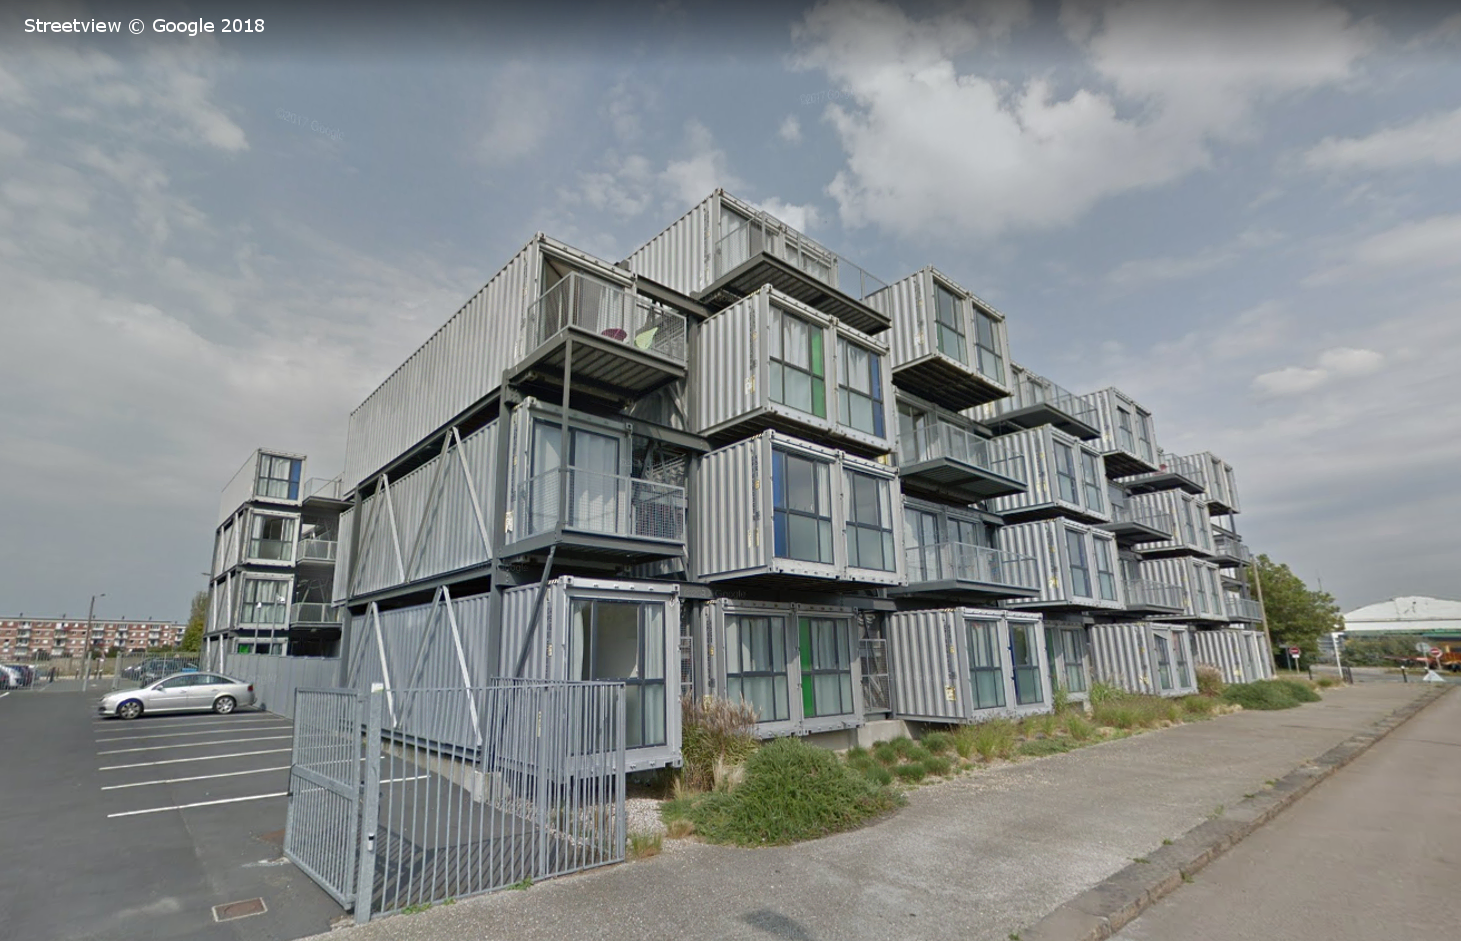 Tour Seven Shipping Container Apartments with Google Streetview